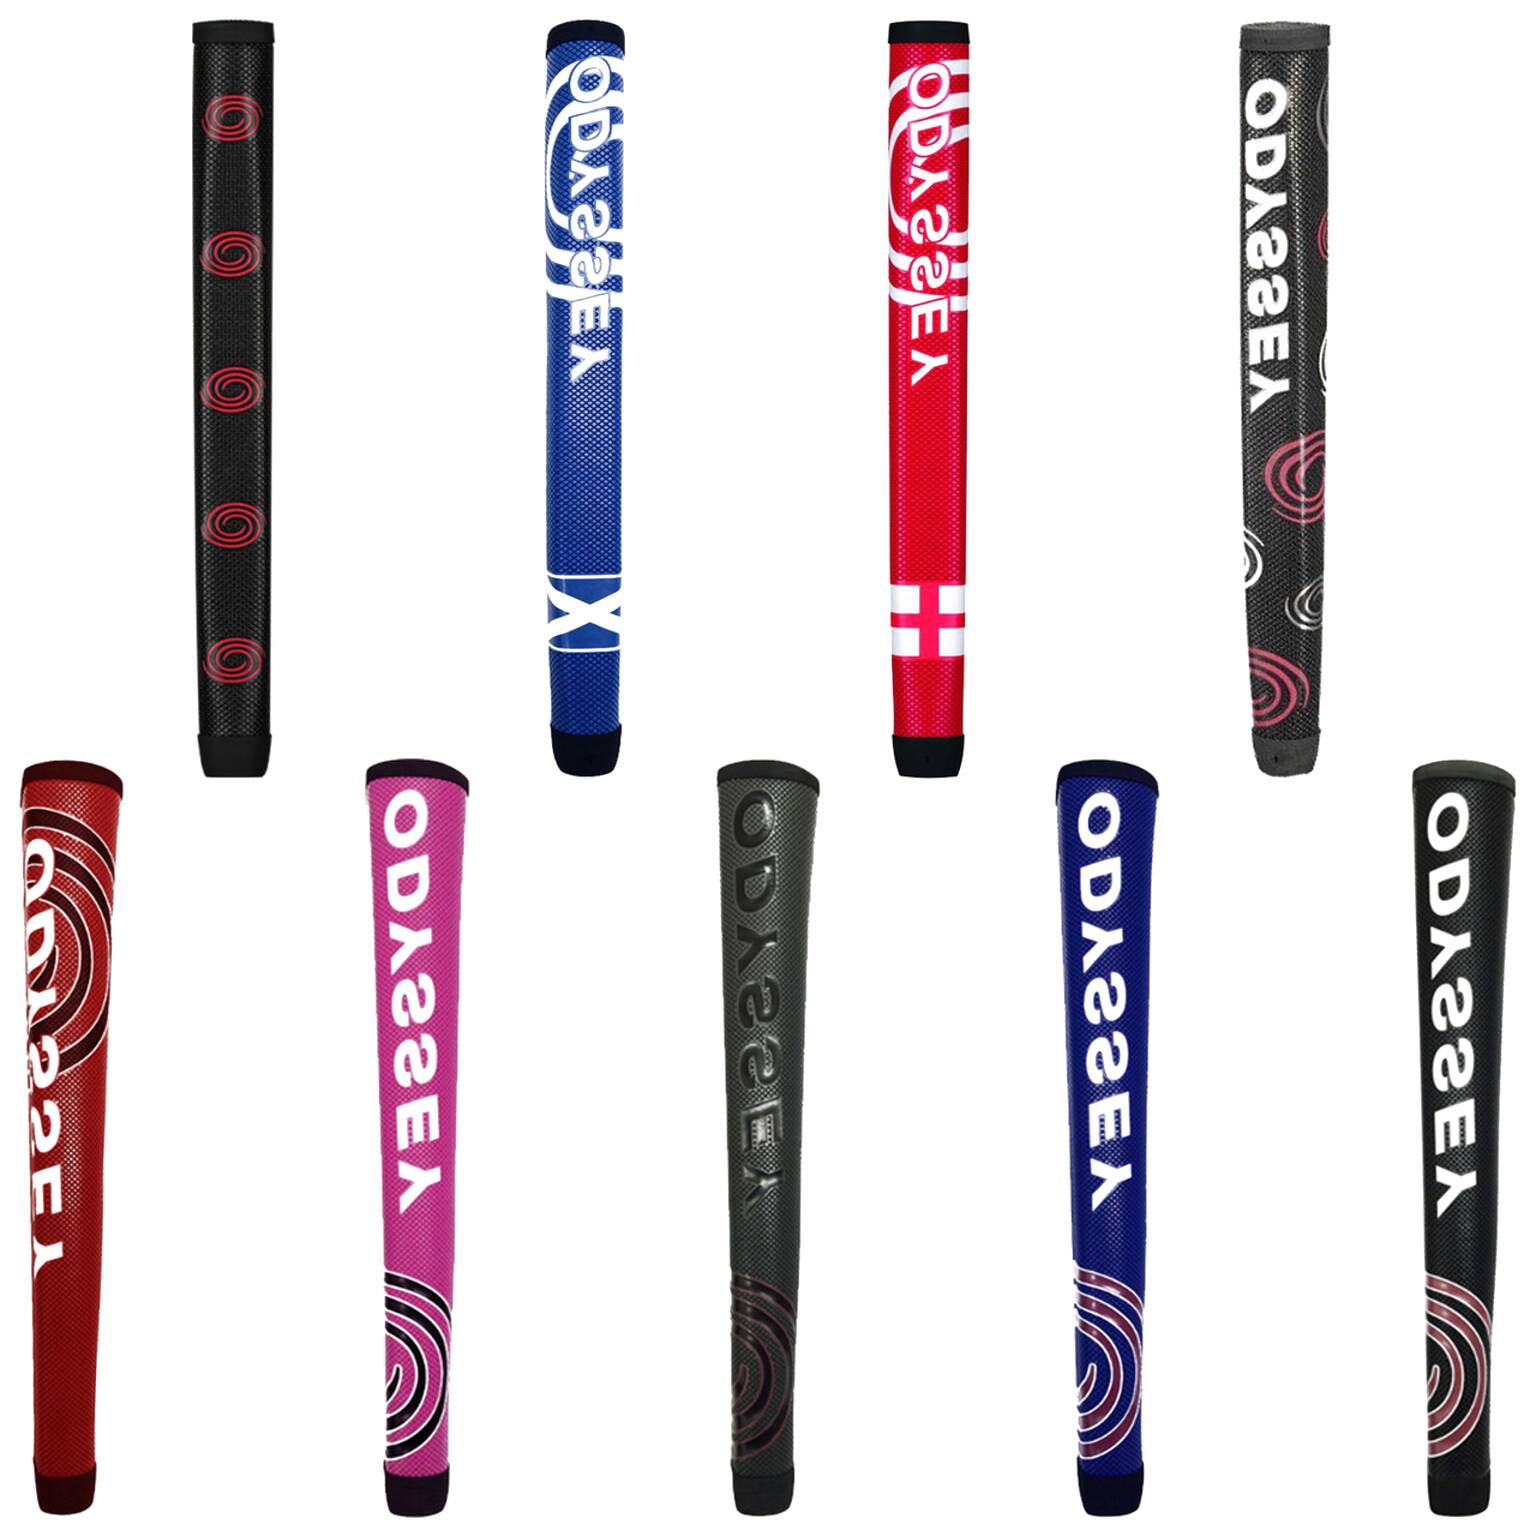 odyssey putter grip replacement